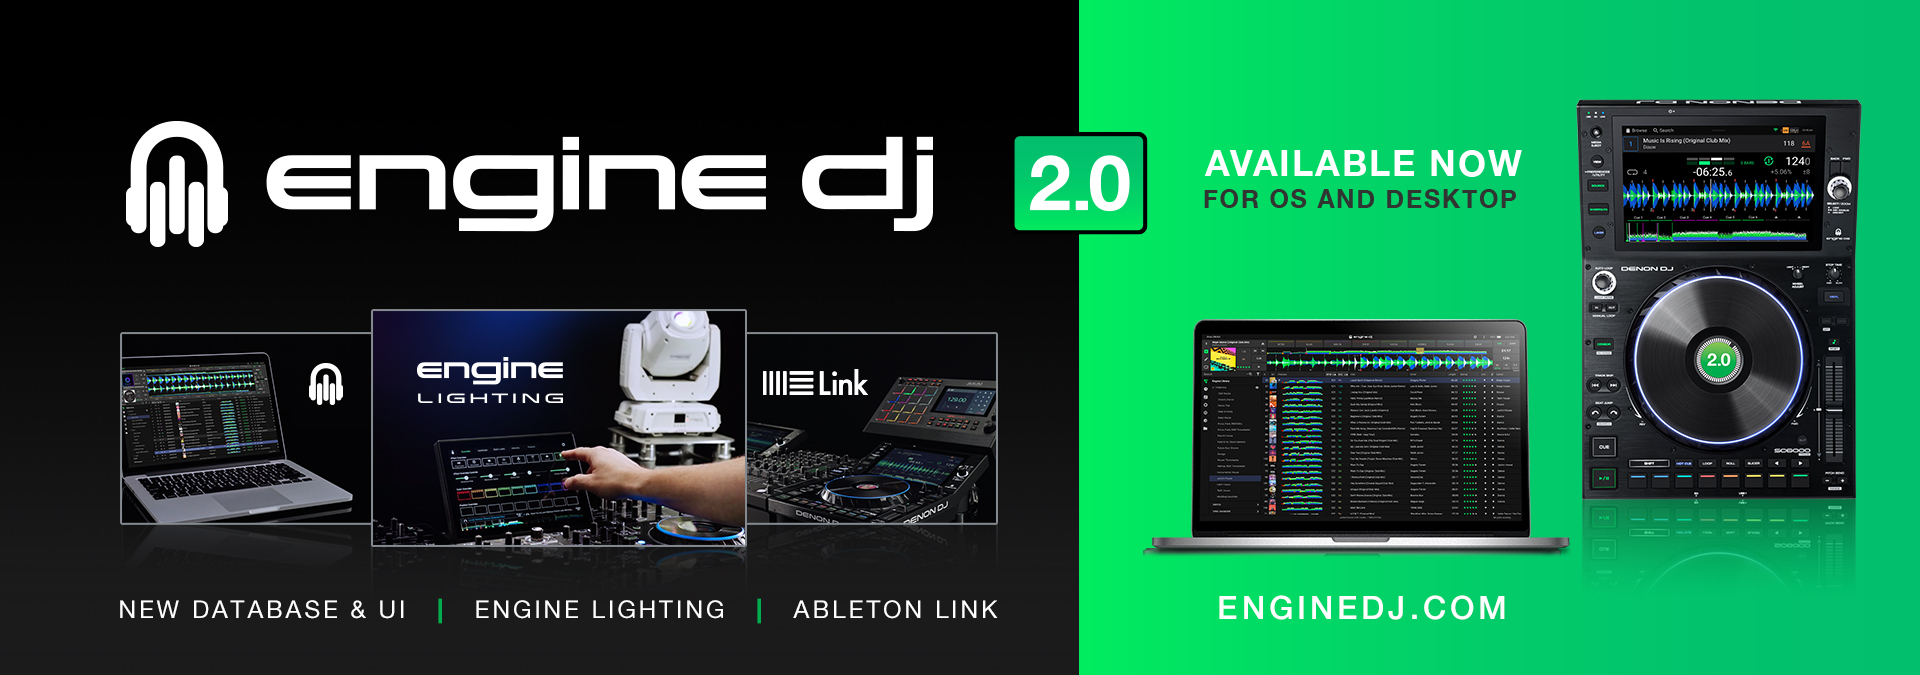 ion discover dj free compatible software